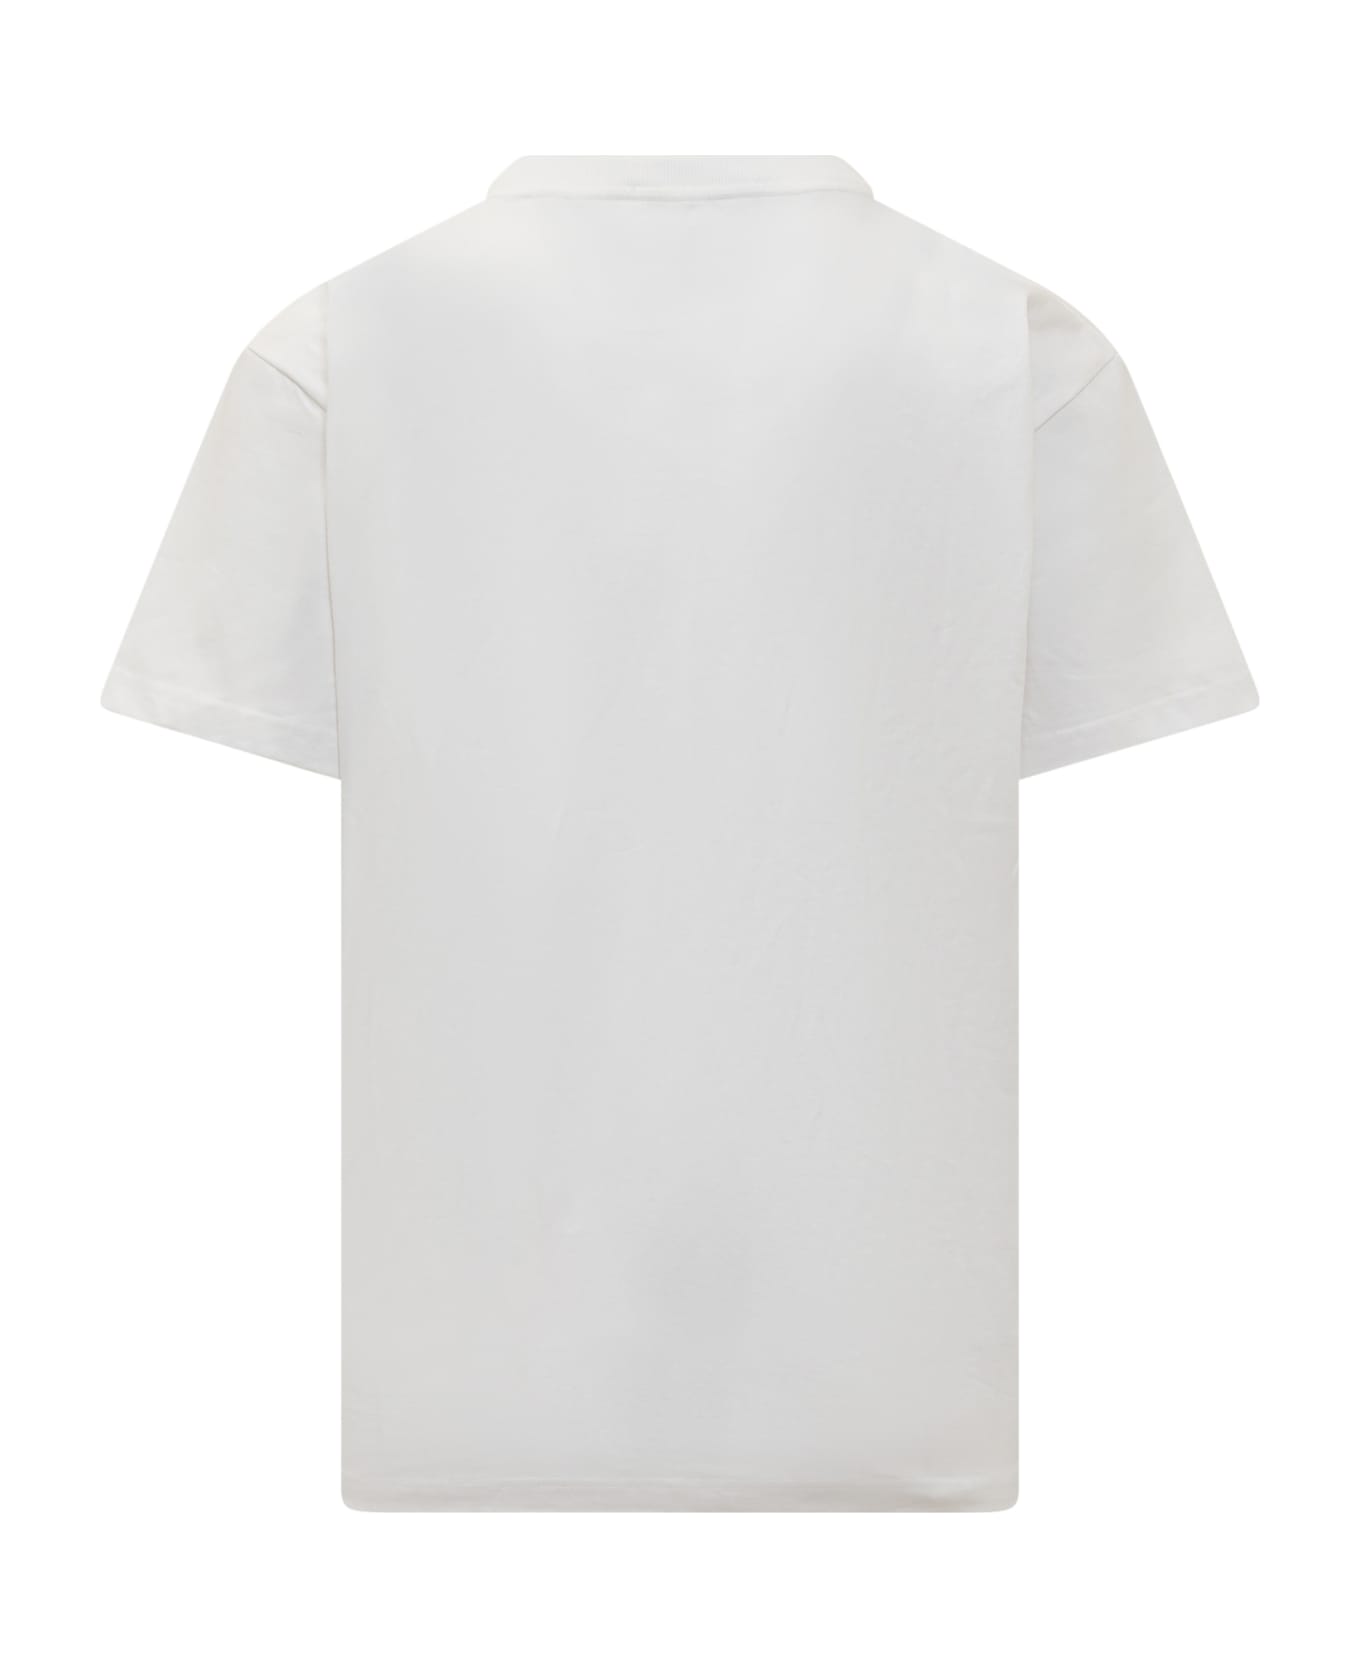 Andersson Bell Sunny T-shirt - WHITE シャツ